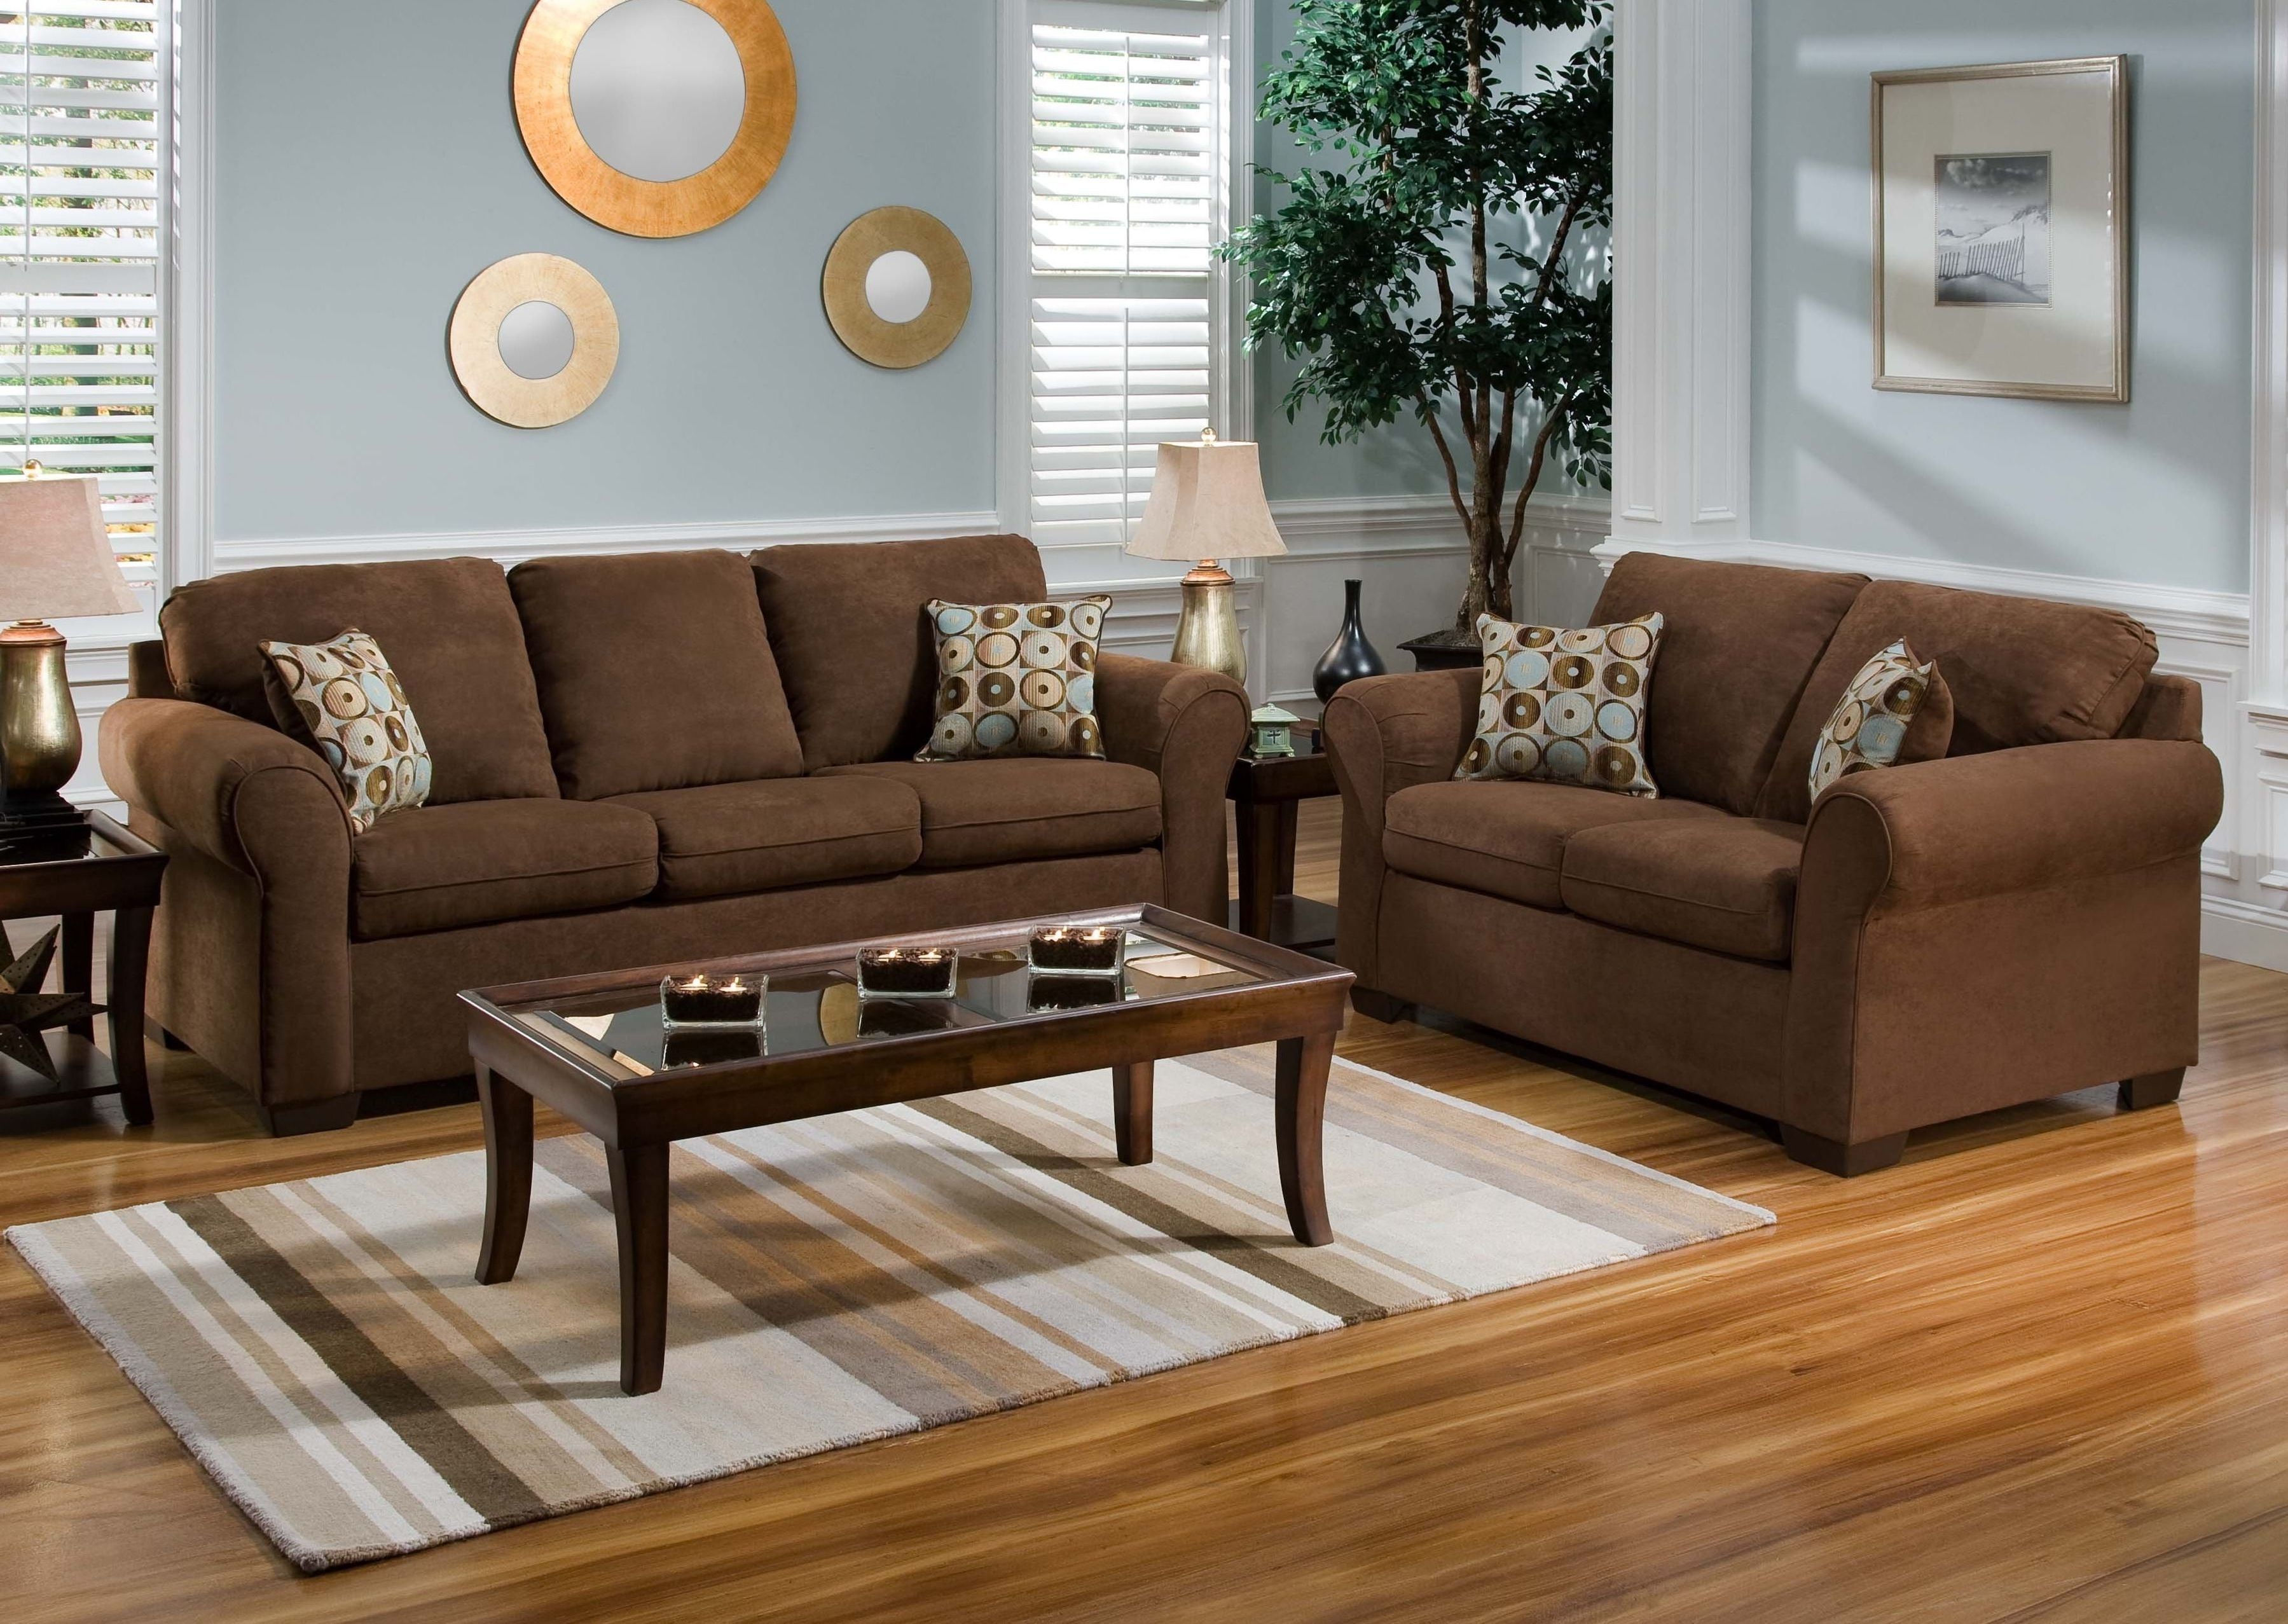 Brown Leather Couches Living Room Decor Red Accents